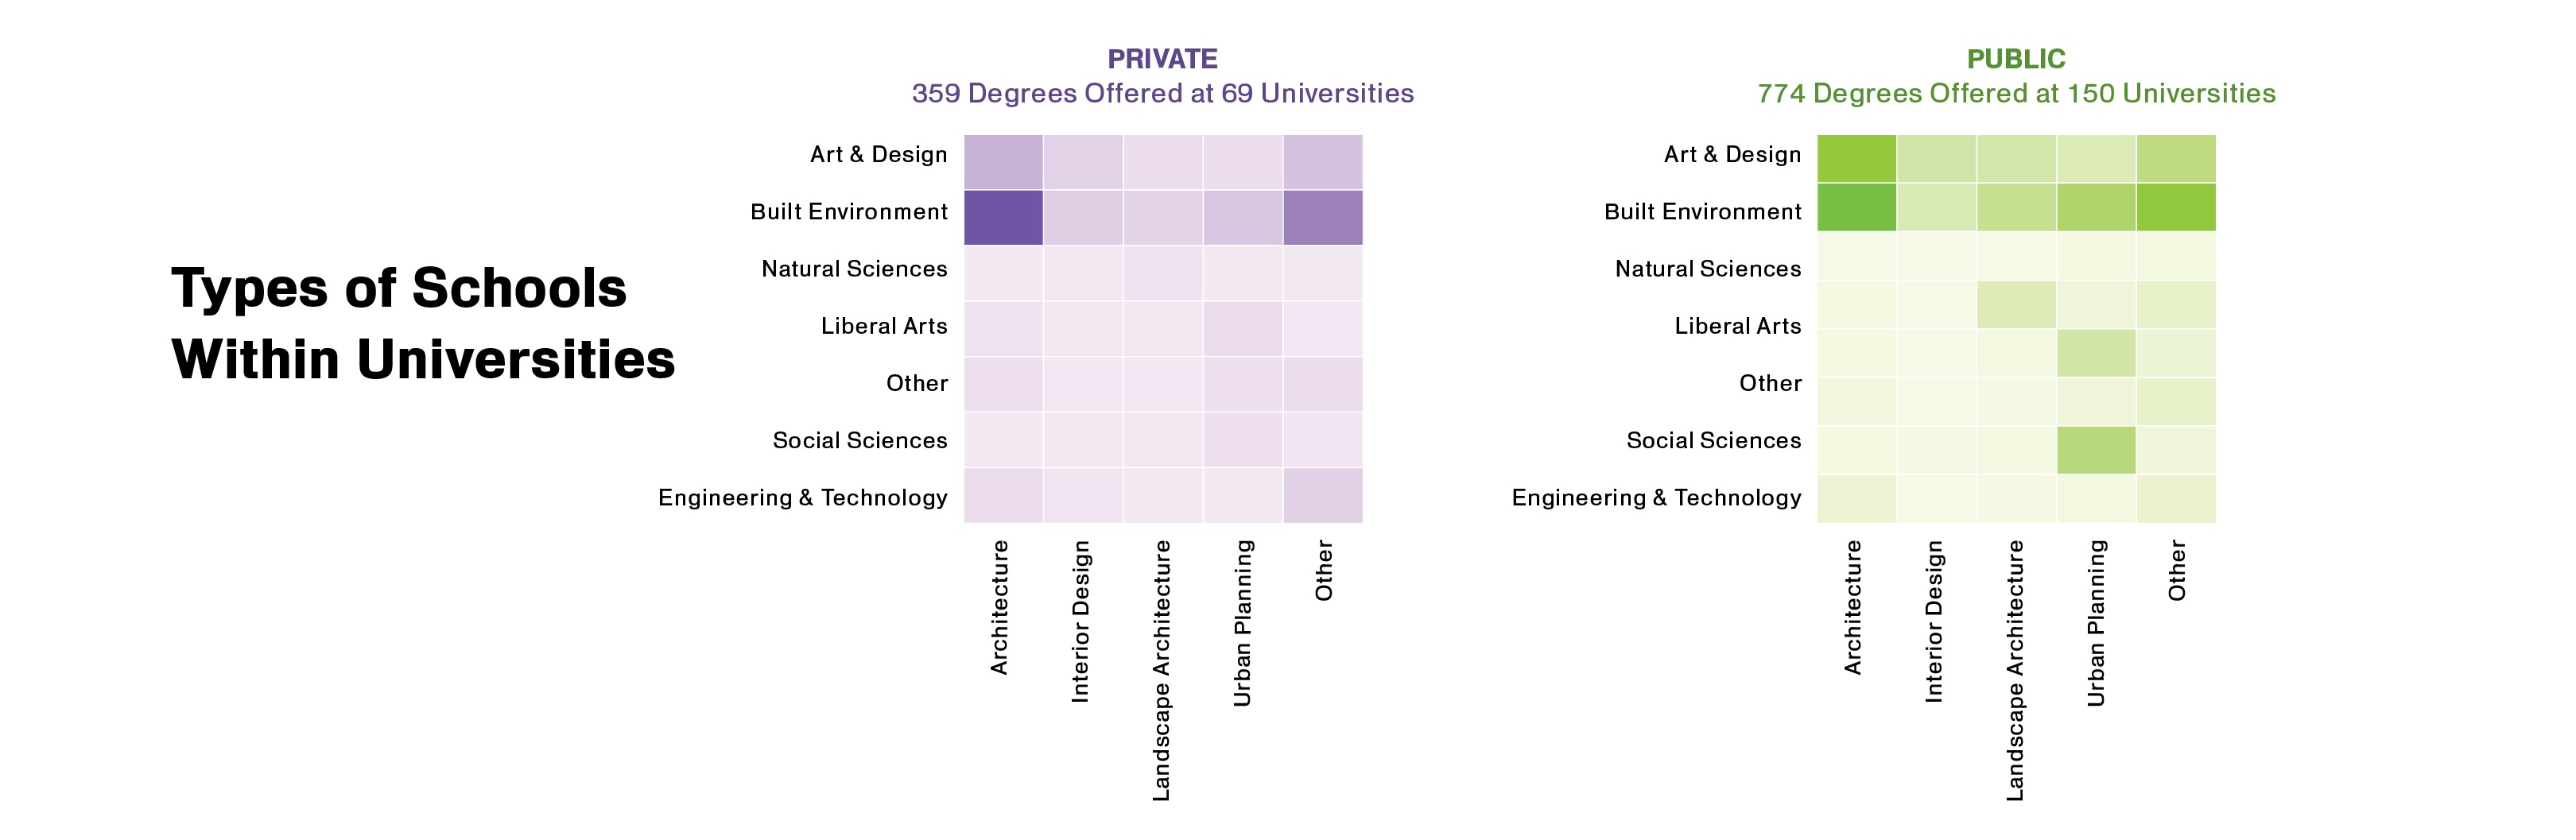 Types of Schools in Private and Public Universities 